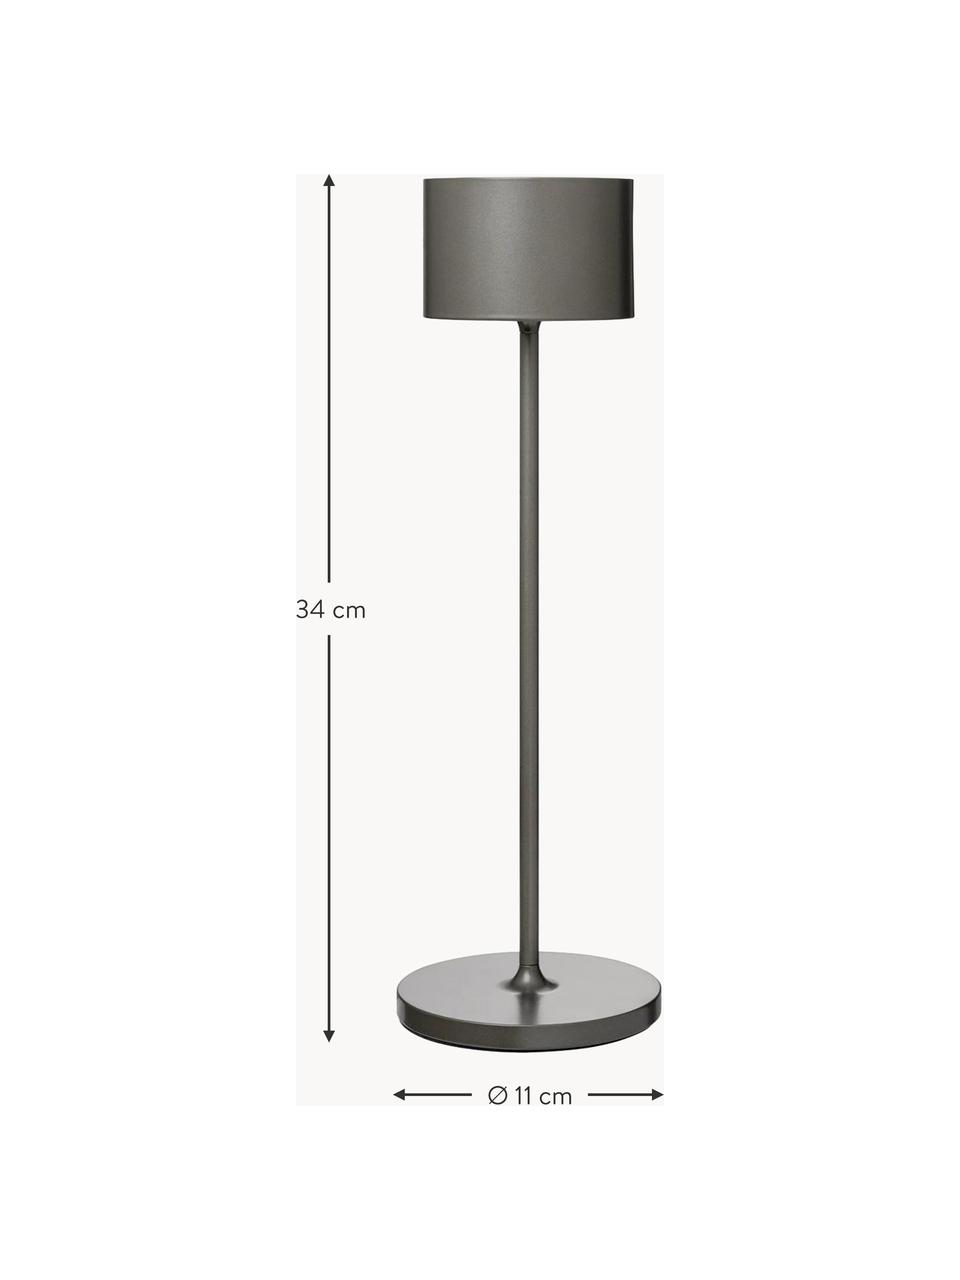 Mobile LED-Outdoor-Tischlampe Farol, dimmbar, Taupe, Ø 11 x H 34 cm